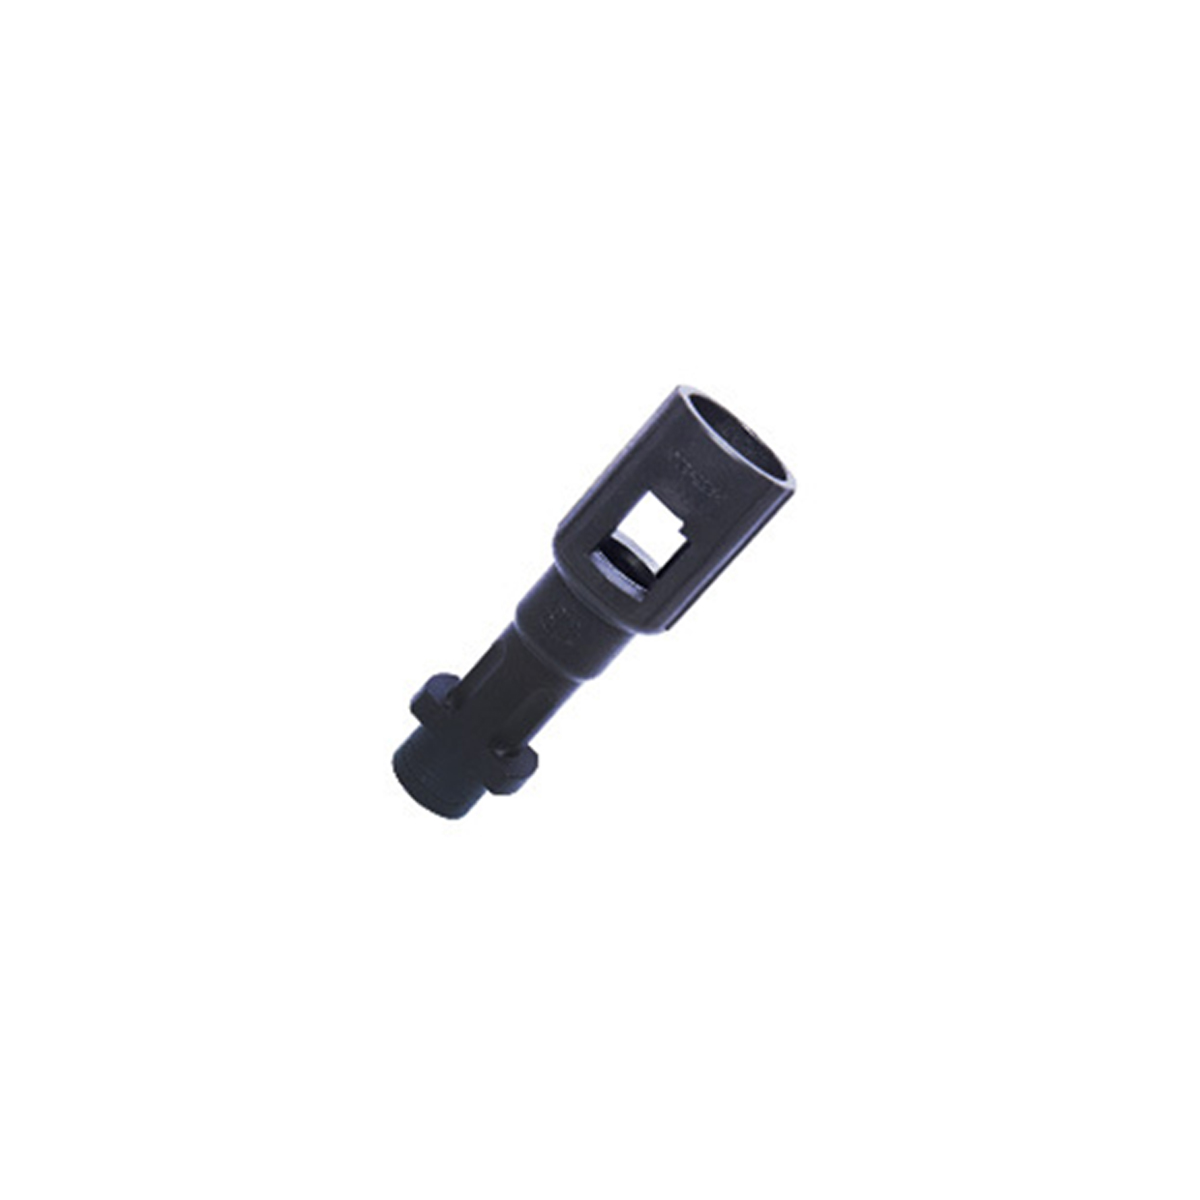 160-Bar-High-Pressure-Washer-Nozzle-432cm-StraightBent-Mouth-Adapter-1662973-6